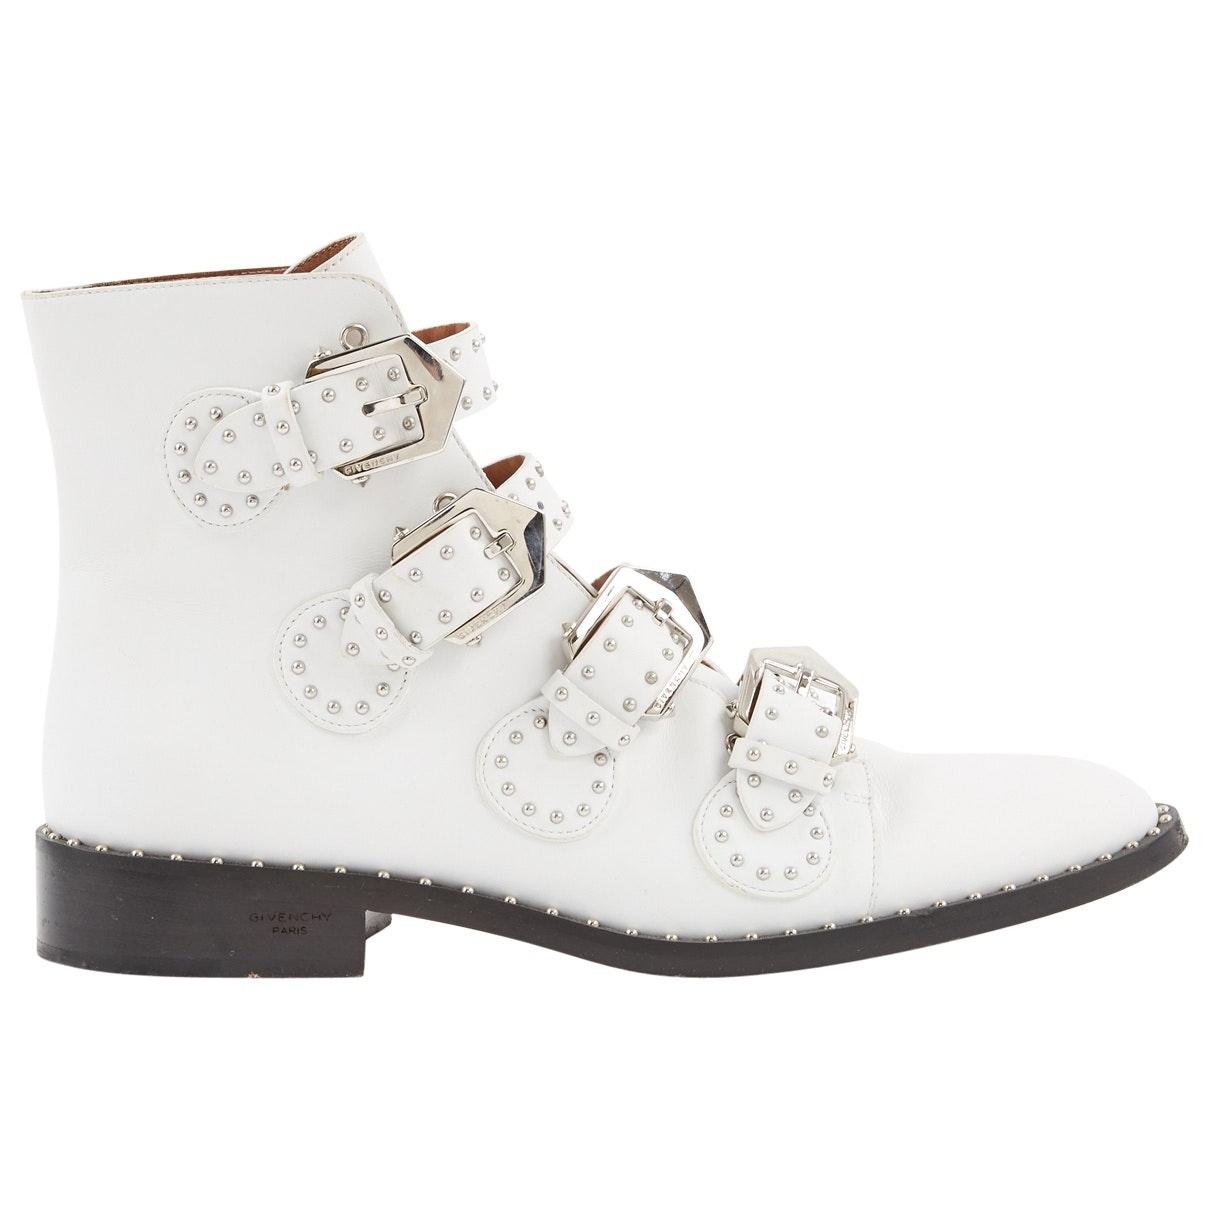 Givenchy Leather Elegant White Flat Boots - Save 65% - Lyst